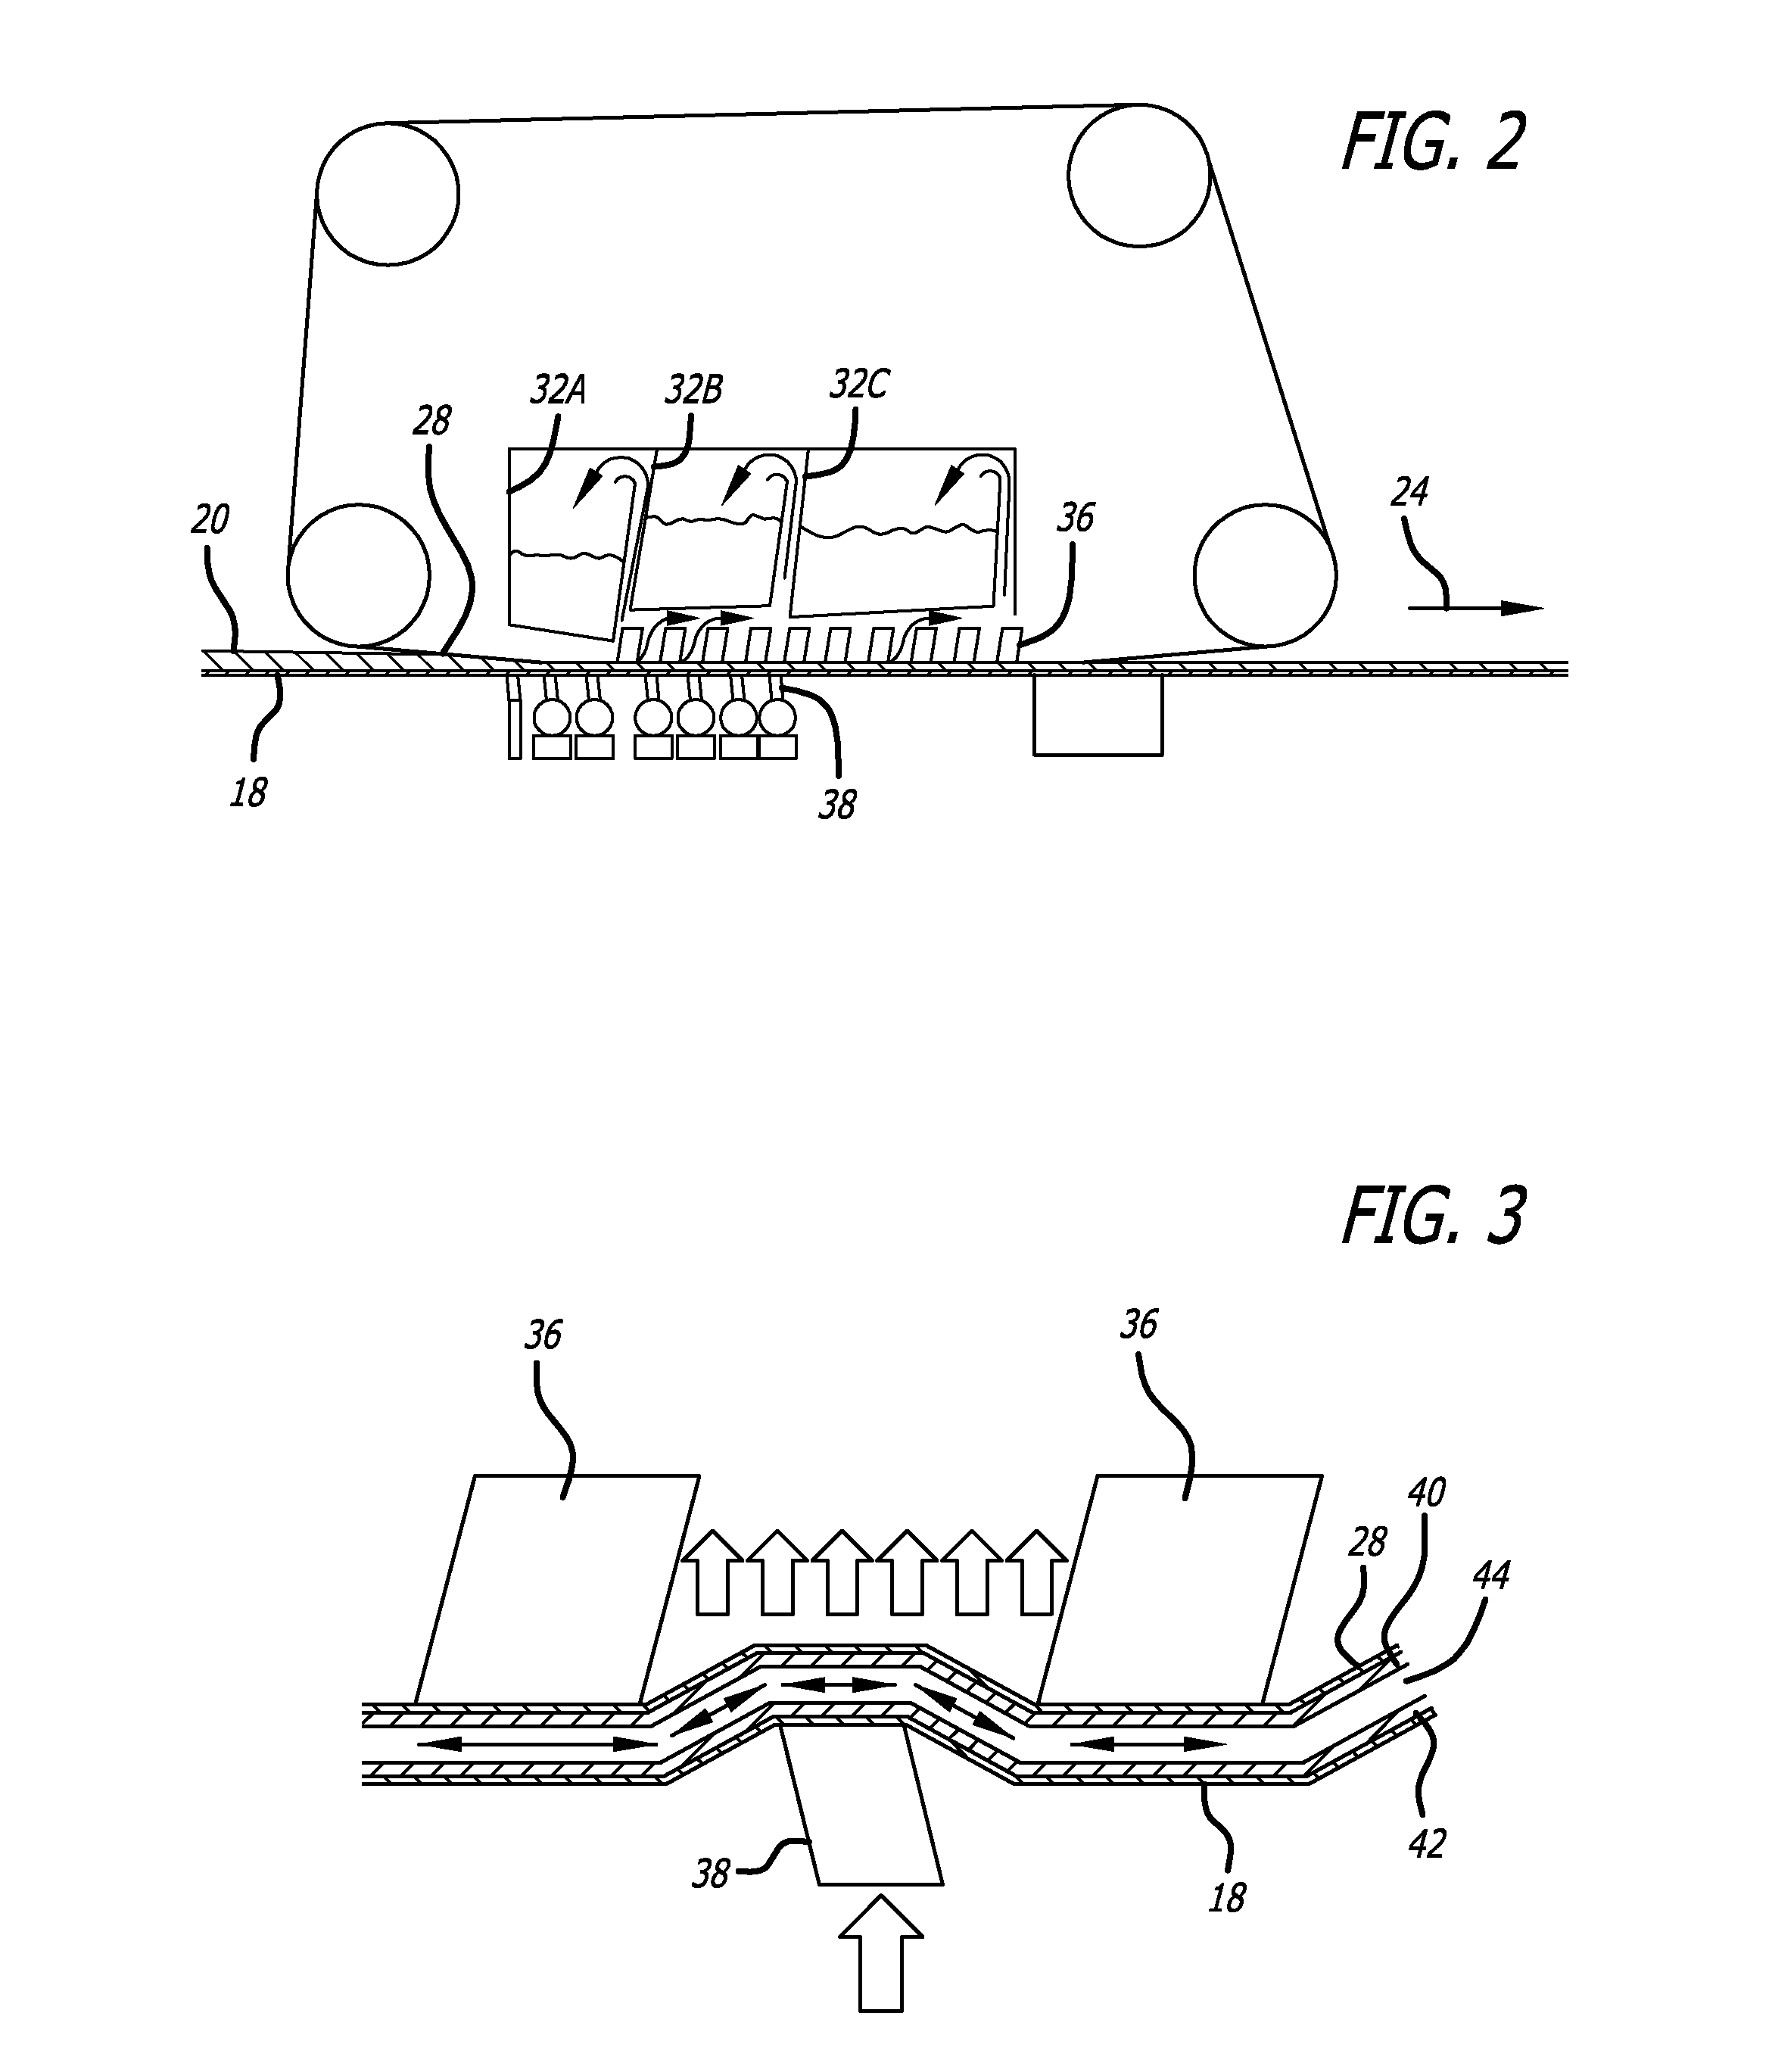 Methods and apparatus for forming fluff pulp sheets